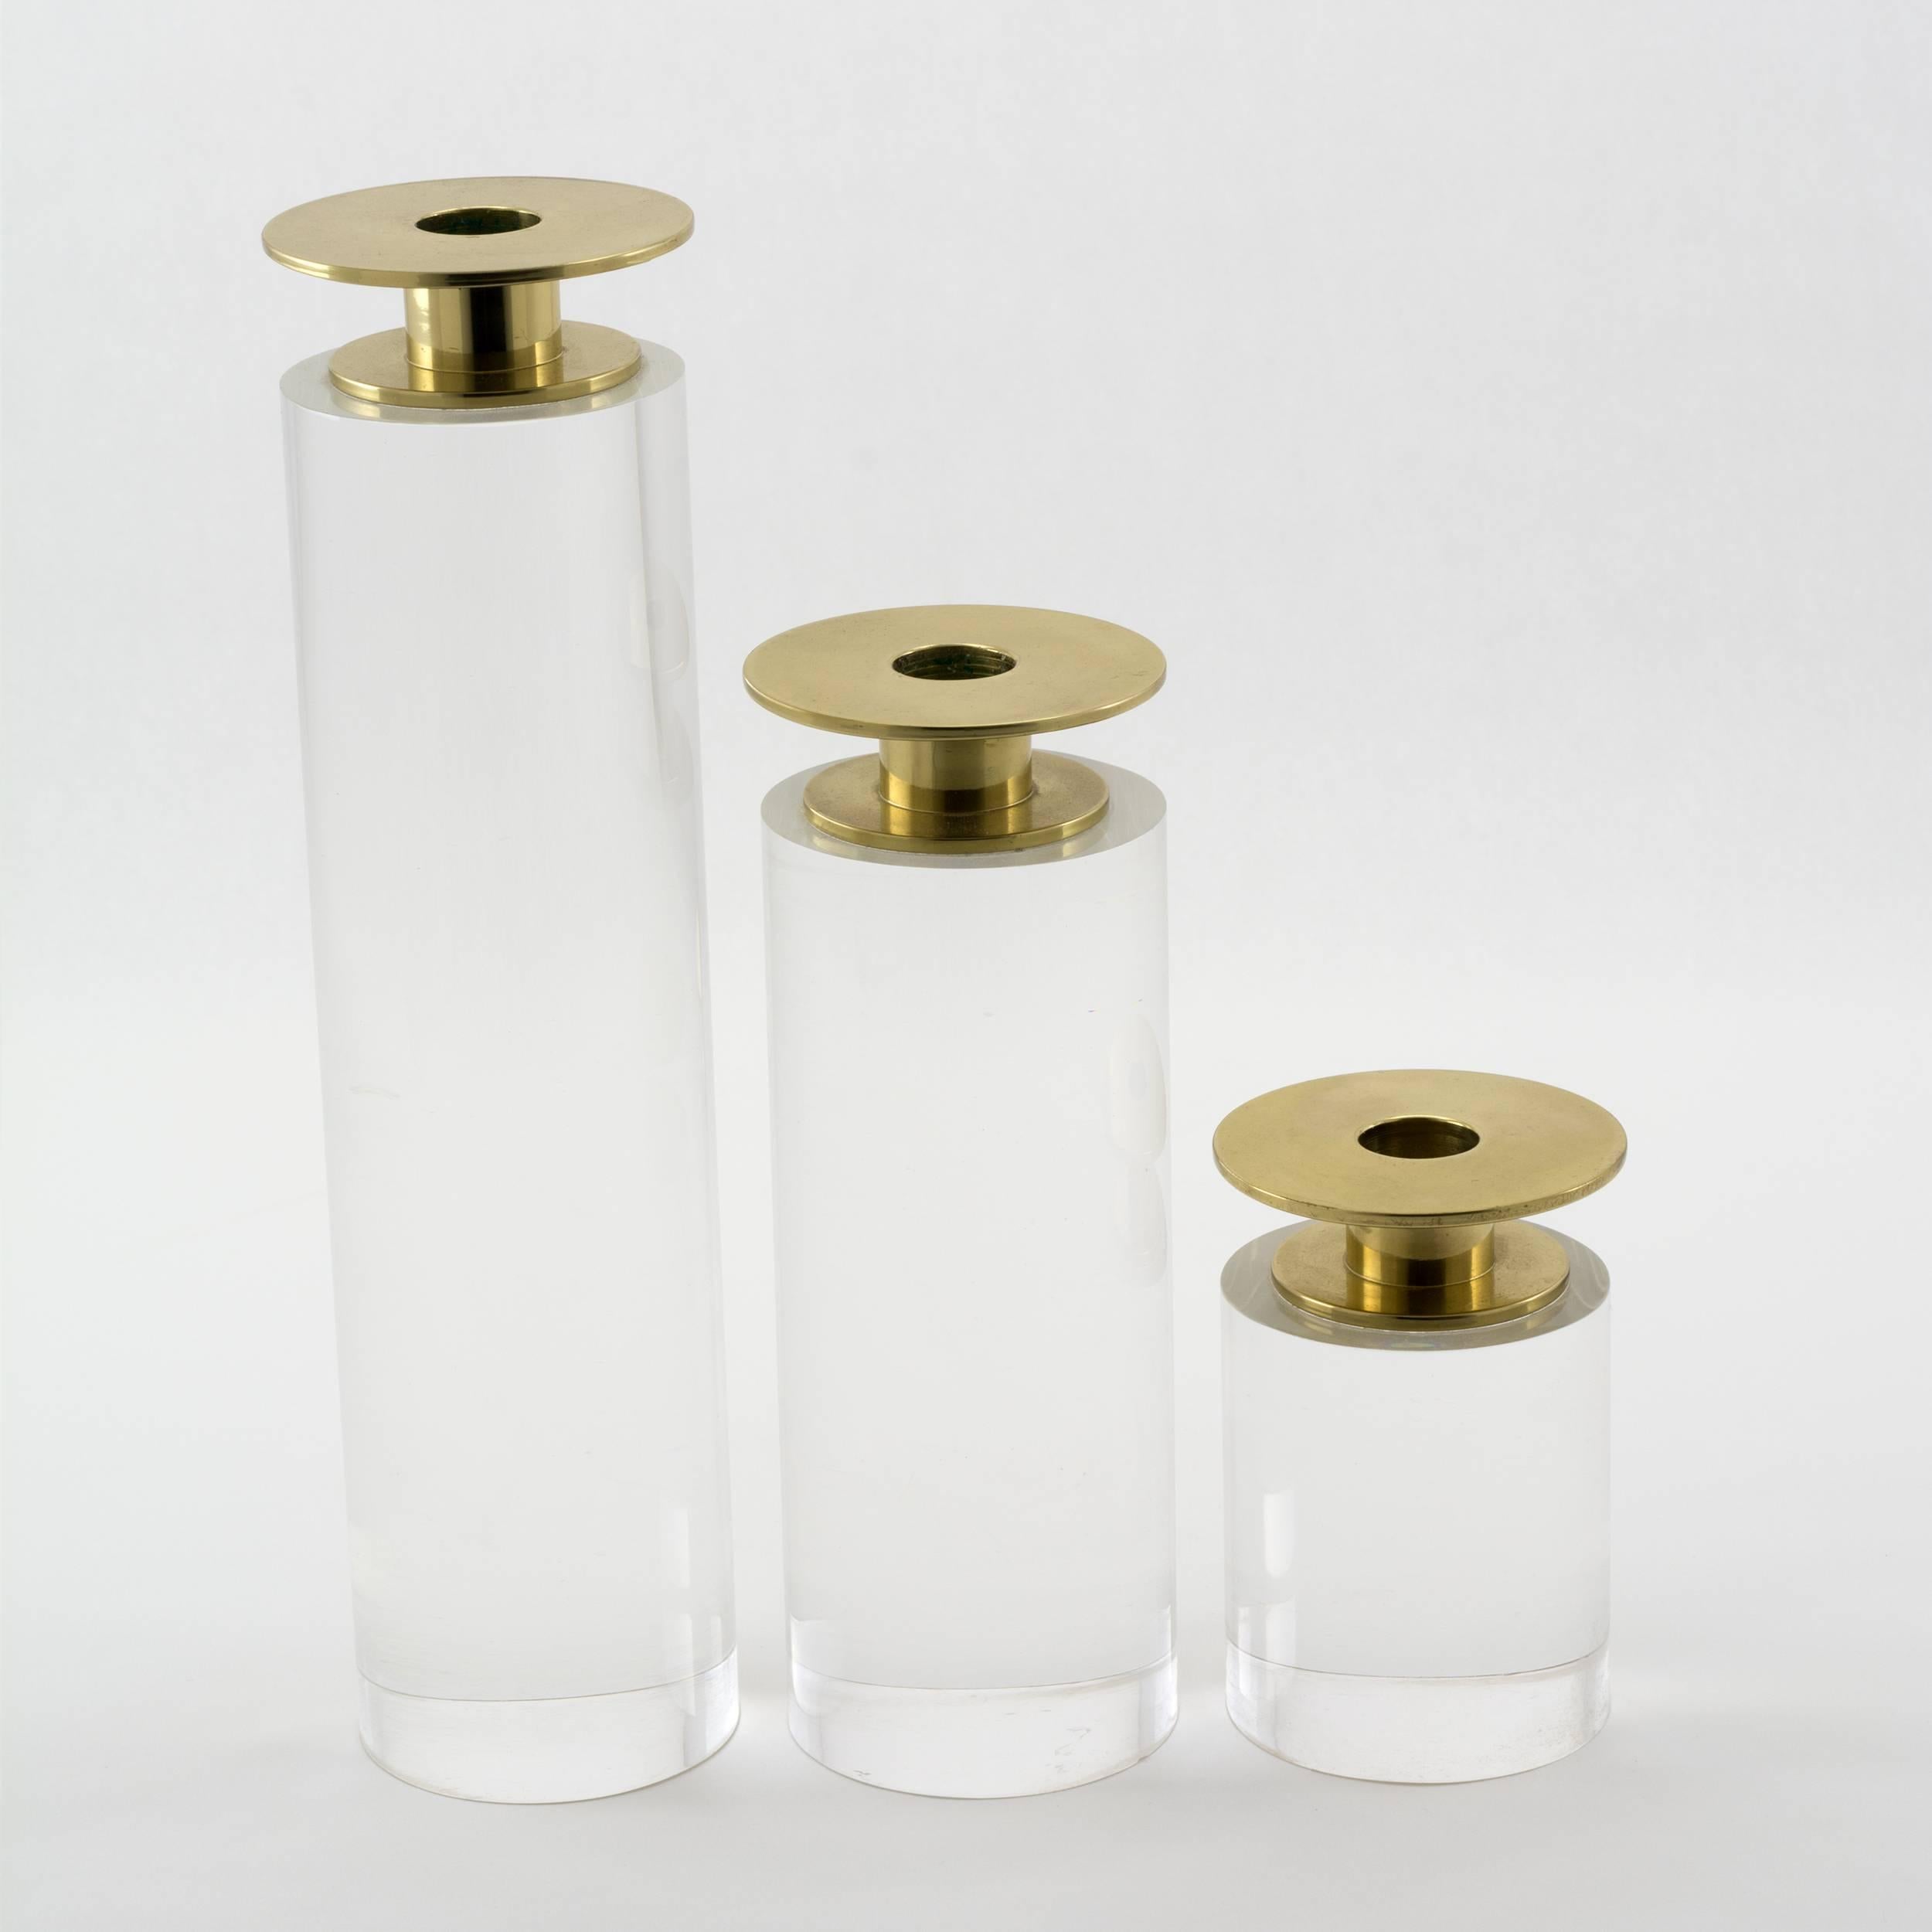 A trio of graduated candleholders by Karl Springer.
Each solid pillar of clear Lucite topped by a brass disk
supporting the candle cup which is topped by another disk
of equal diameter to the pillar.

Measures: 10-1/2”, 71/2” and 4”tall x